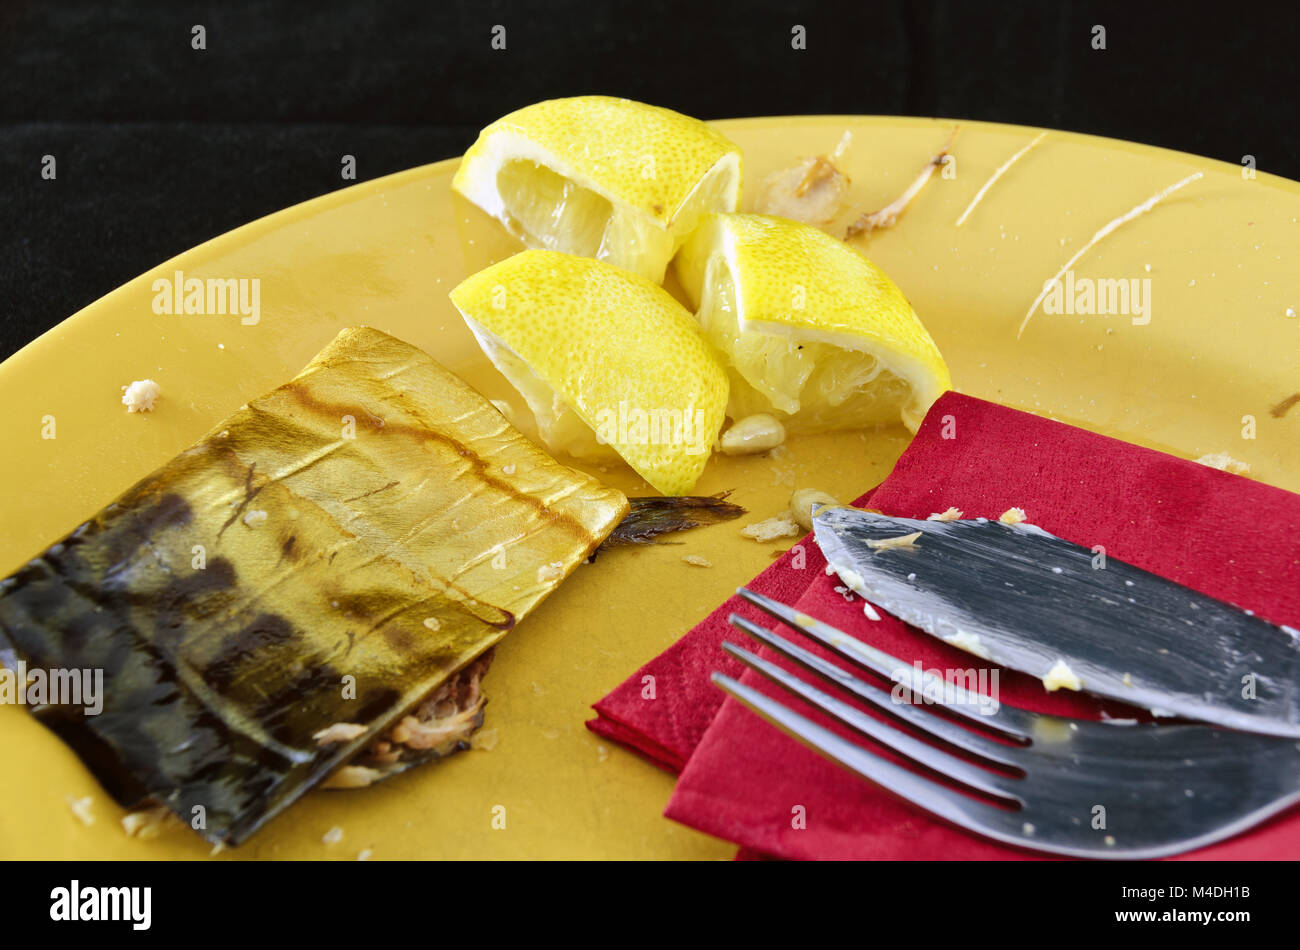 leftovers of smoked fish, lemons and dirty cutlery Stock Photo